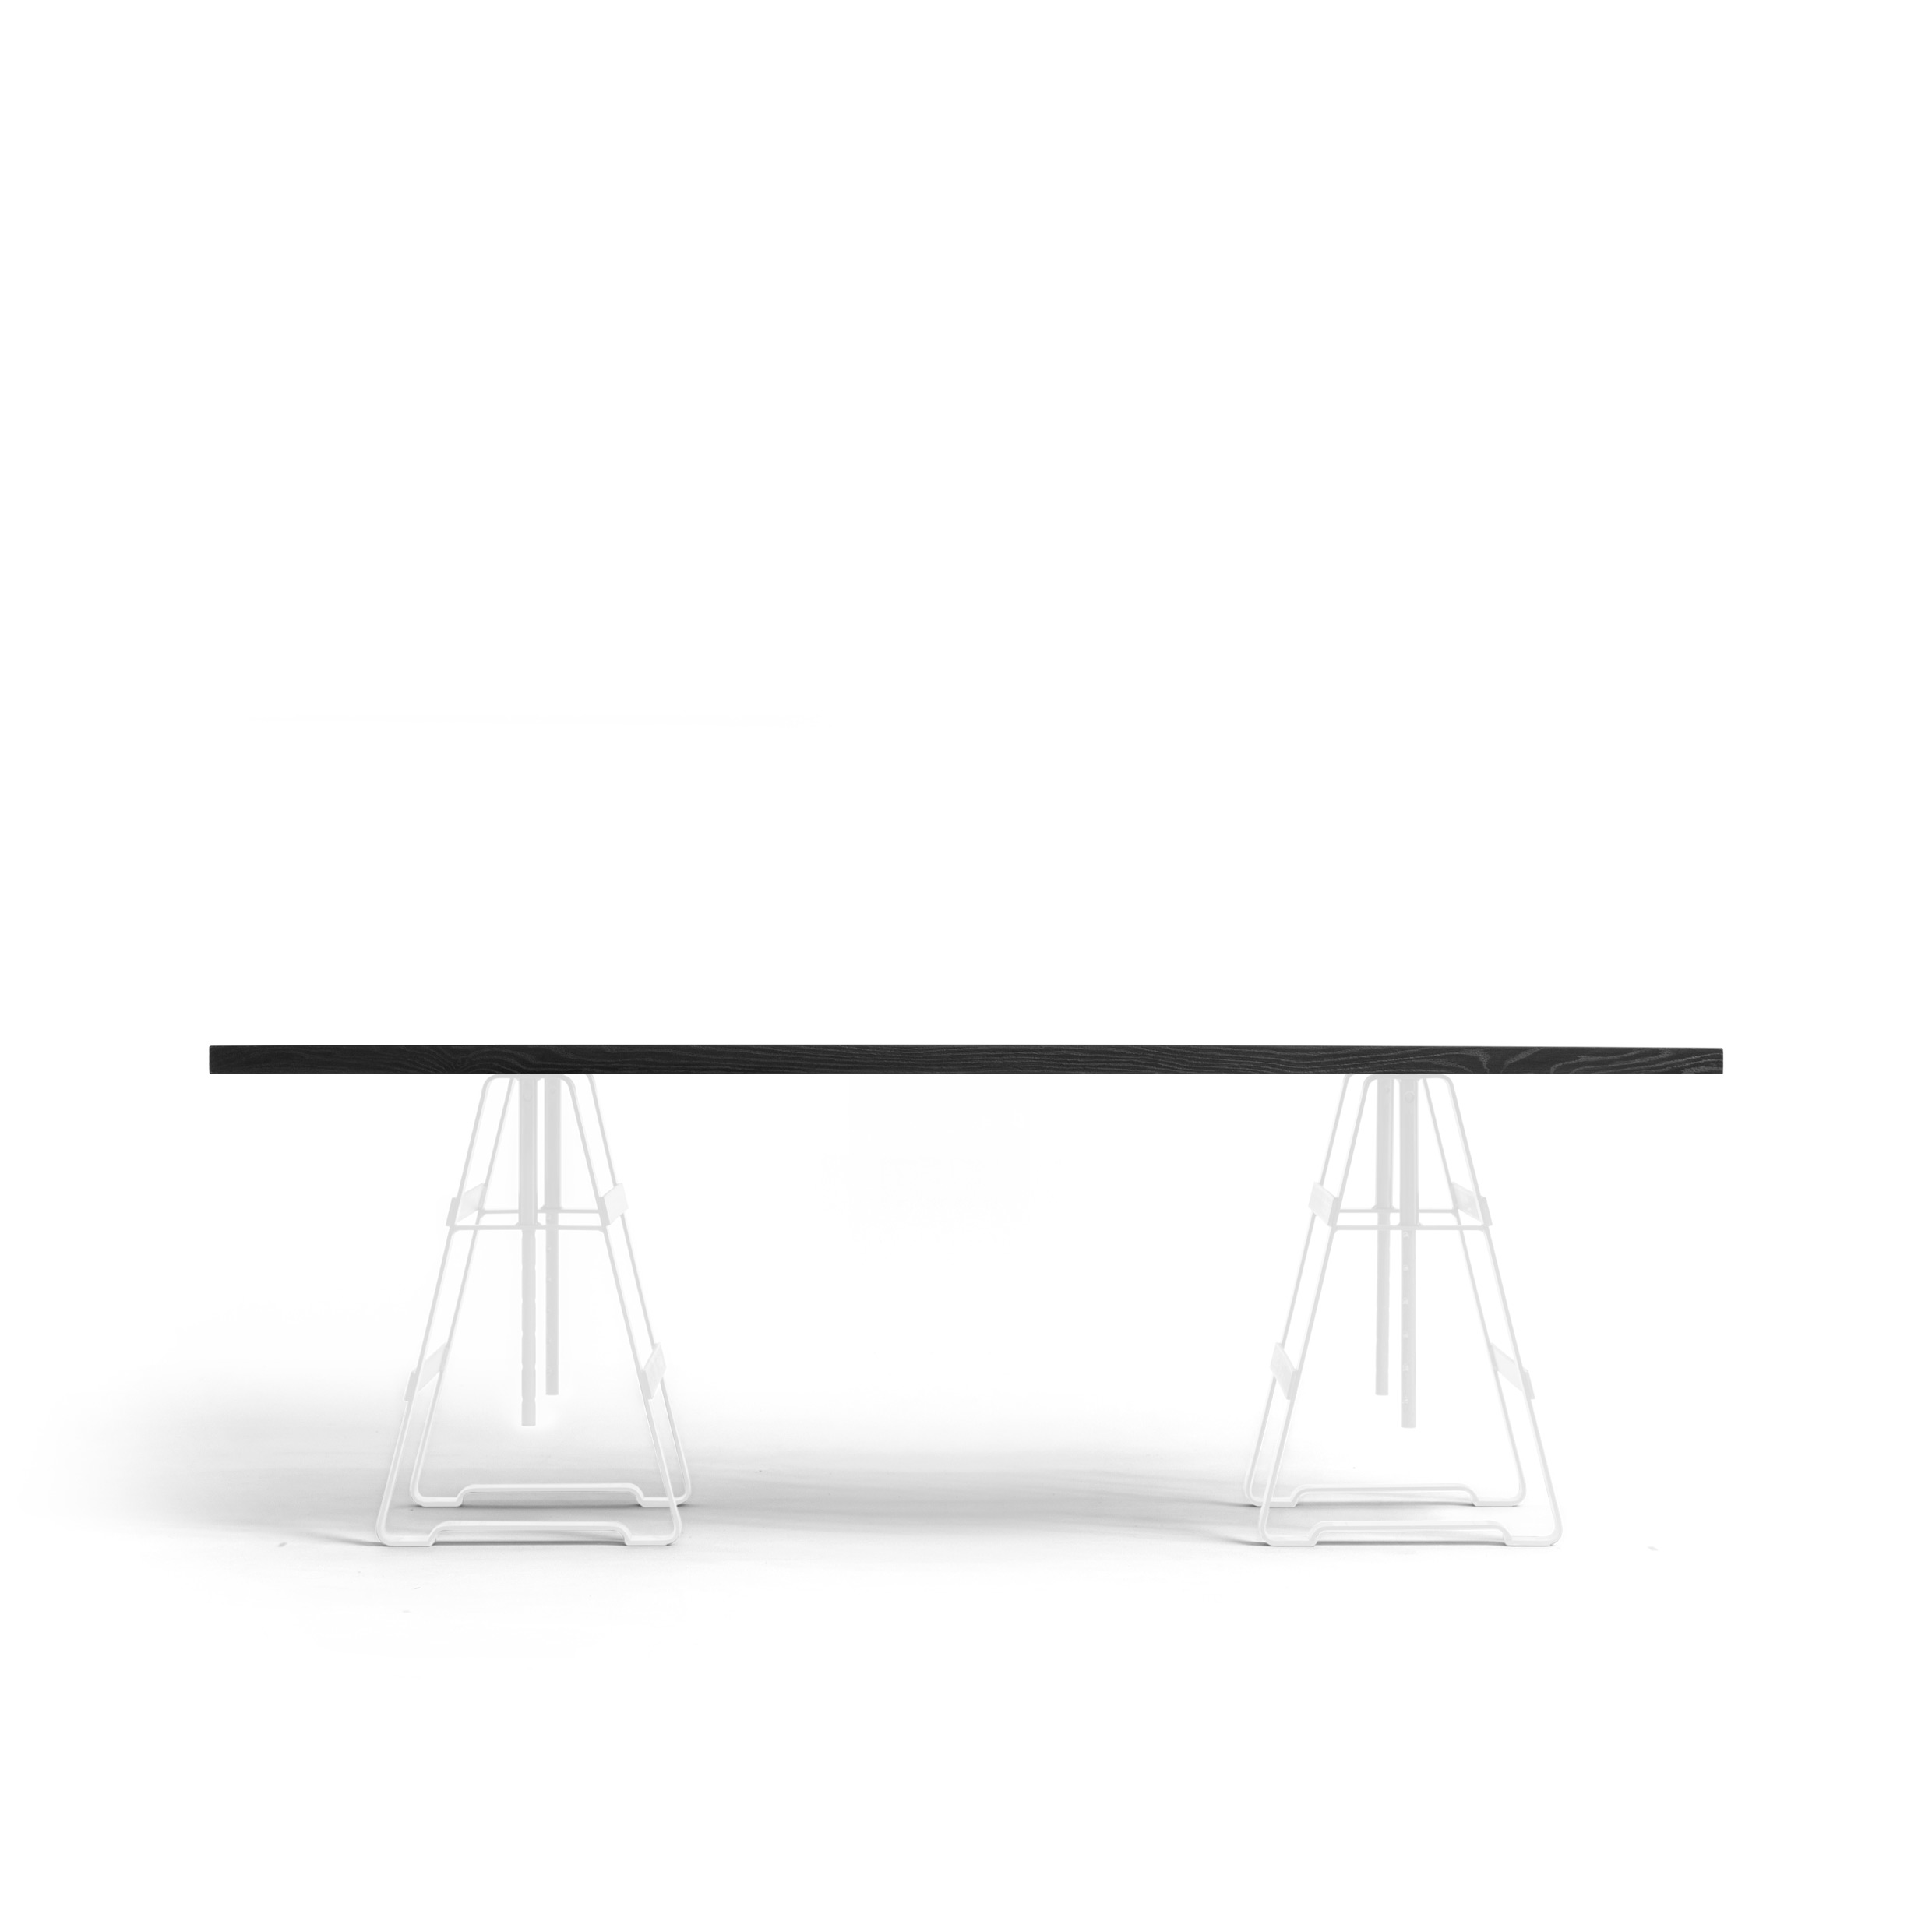 FORM EXCLUSIVE // JOON - IN-/OUTDOOR TABLE | BLACK CARED - 220CM X 45CM X 5CM - PAINT MONKEY WHITE